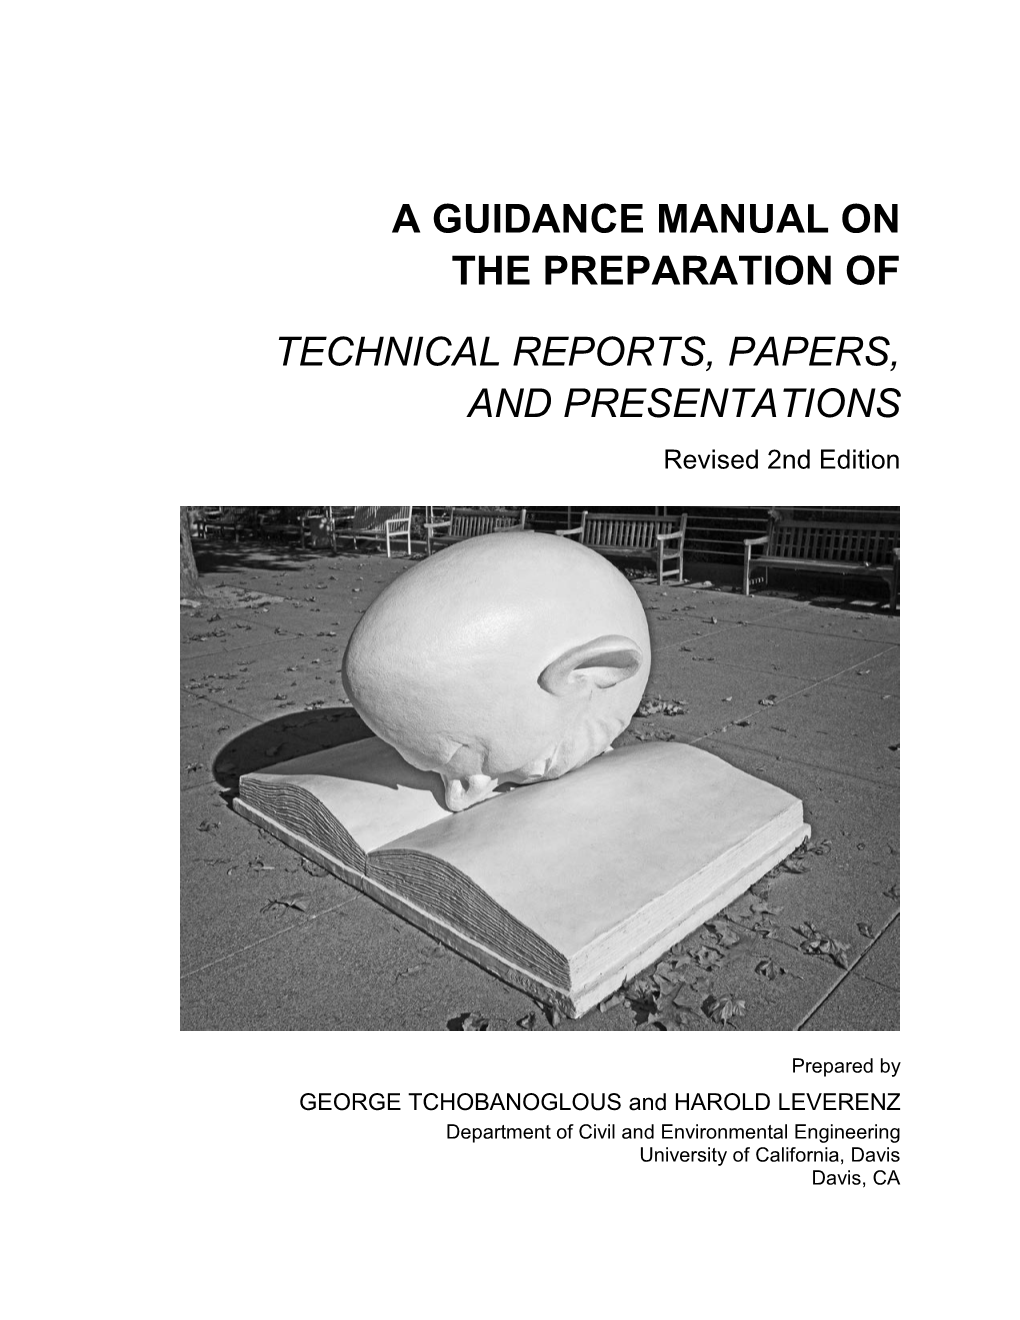 A Guidance Manual on the Preparation of Technical Reports